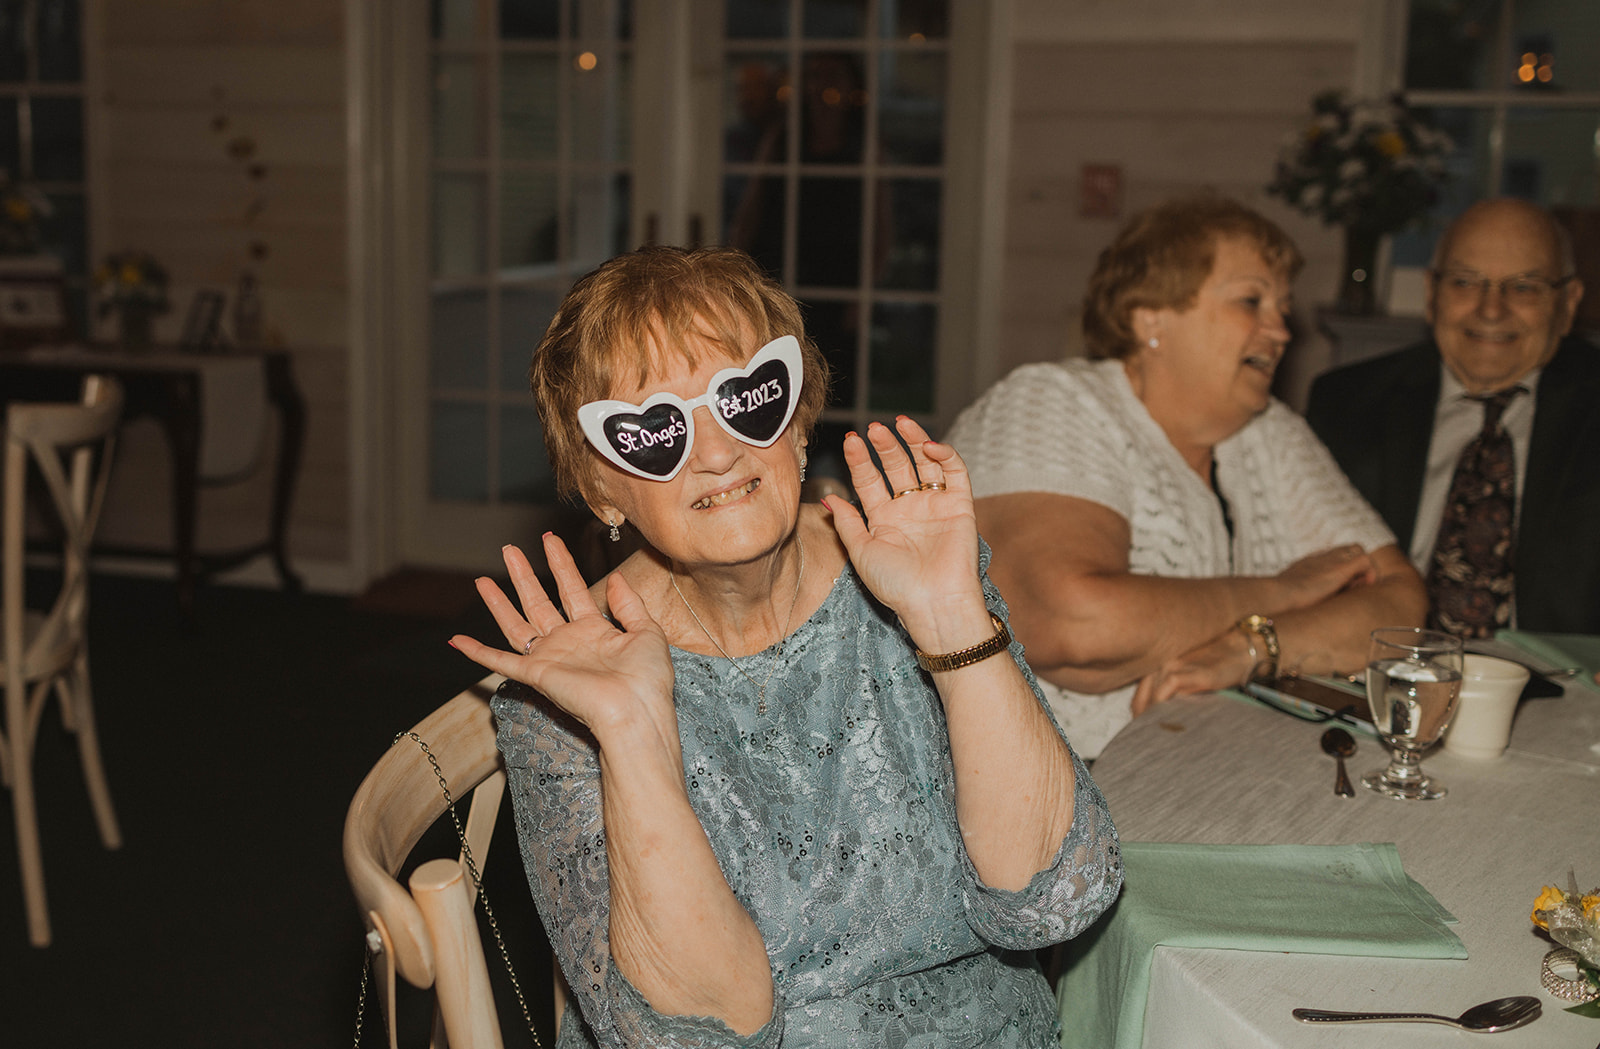 Wedding guests enter the dance floor with new sunglasses